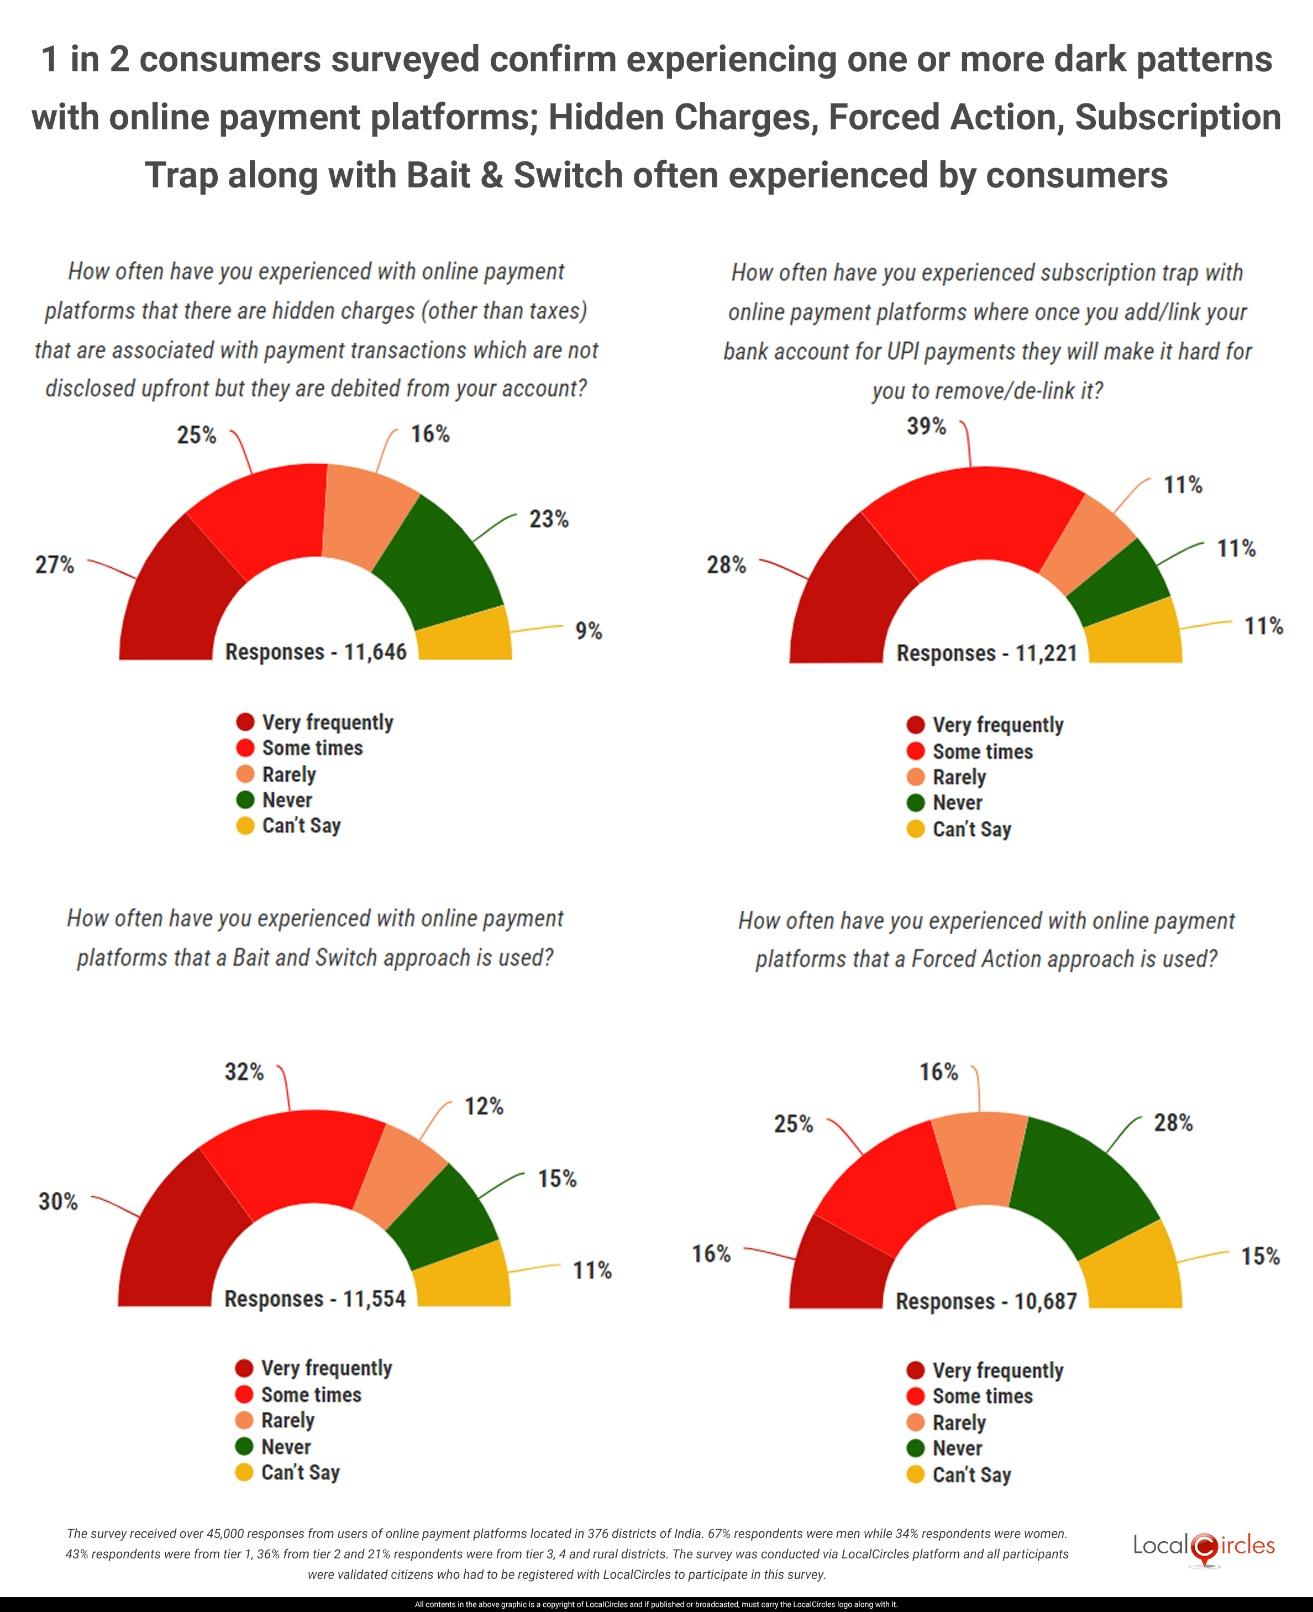 1 in 2 consumers surveyed confirm experiencing one or more dark patterns with online payment platforms; Hidden Charges, Forced Action, Subscription Trap along with Bait & Switch often experienced by consumers